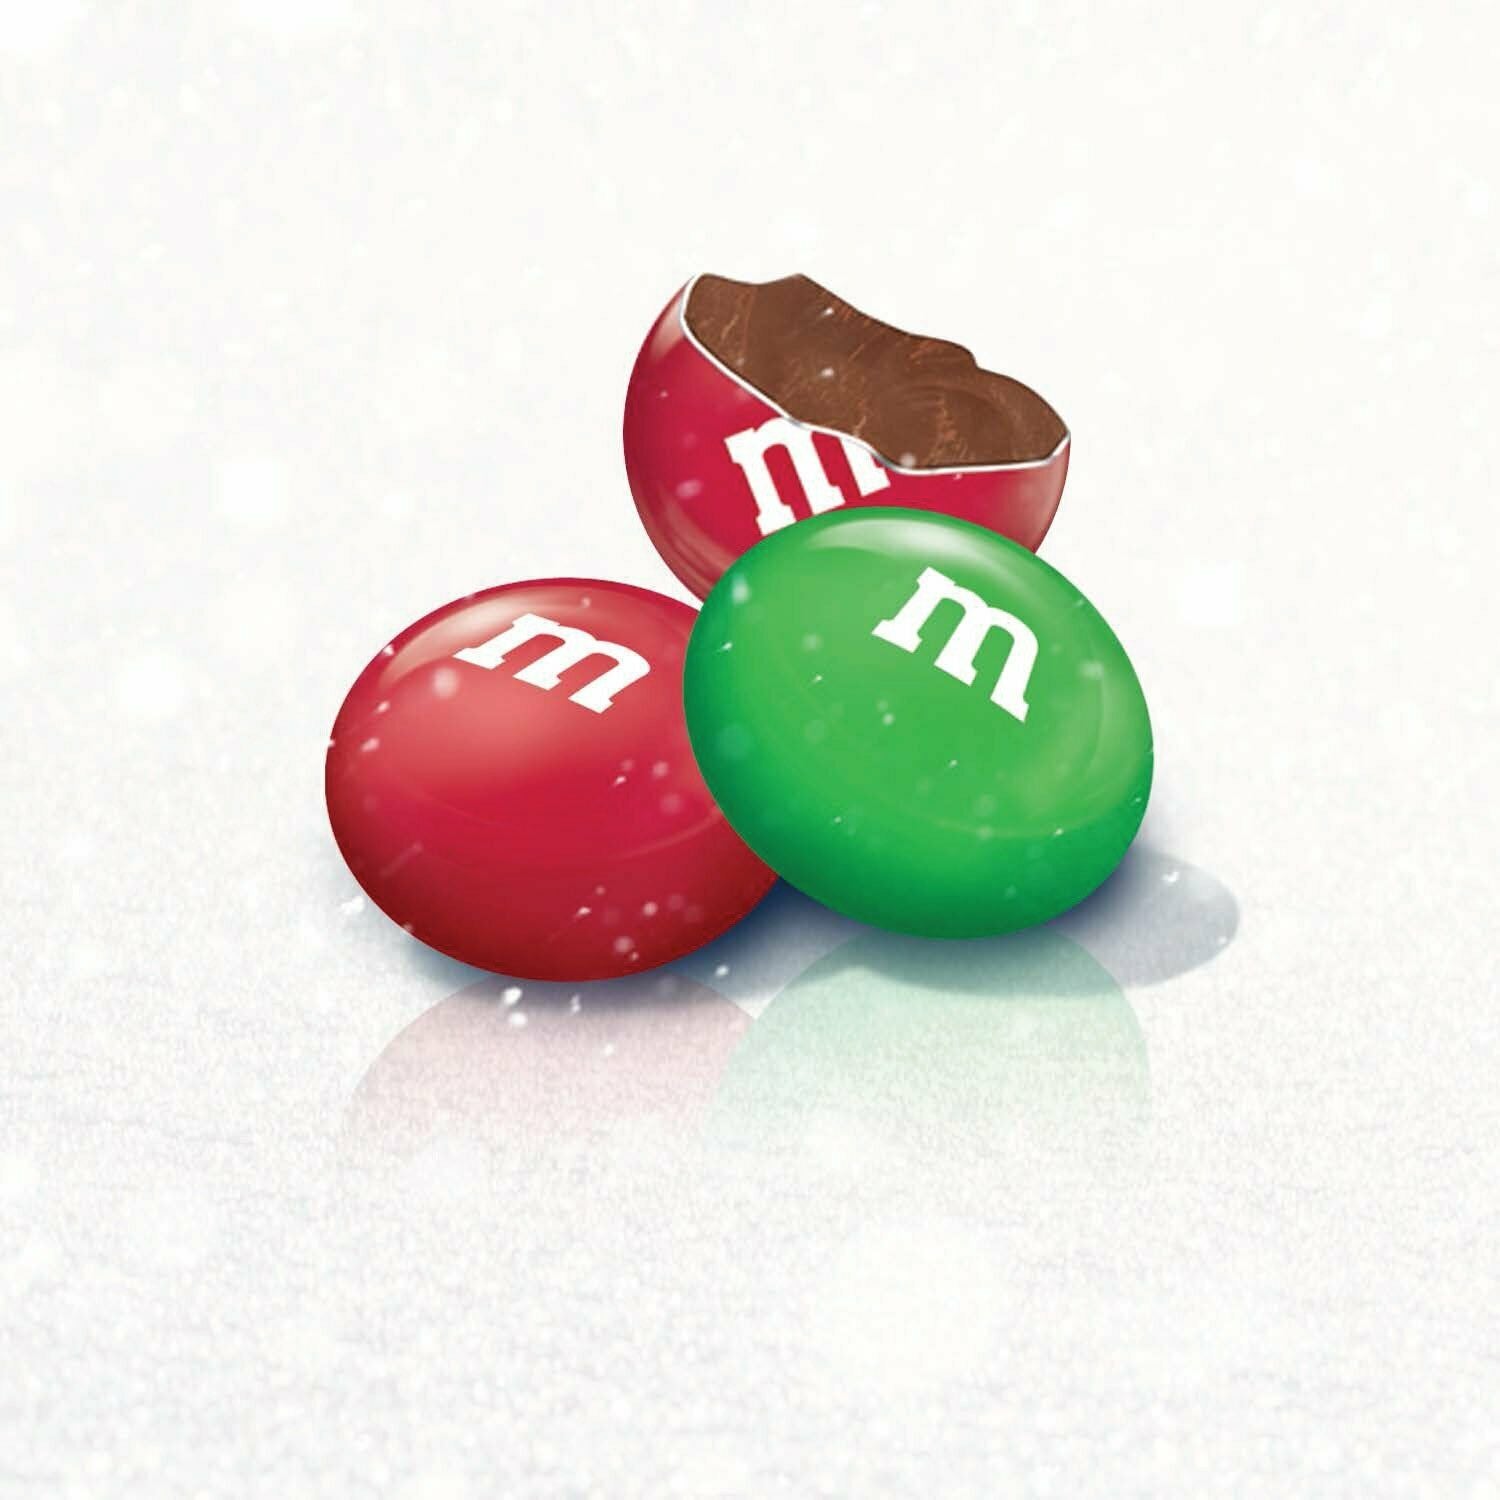 Save on M&M's Peanut Butter Chocolate Candies Red & Green Holiday